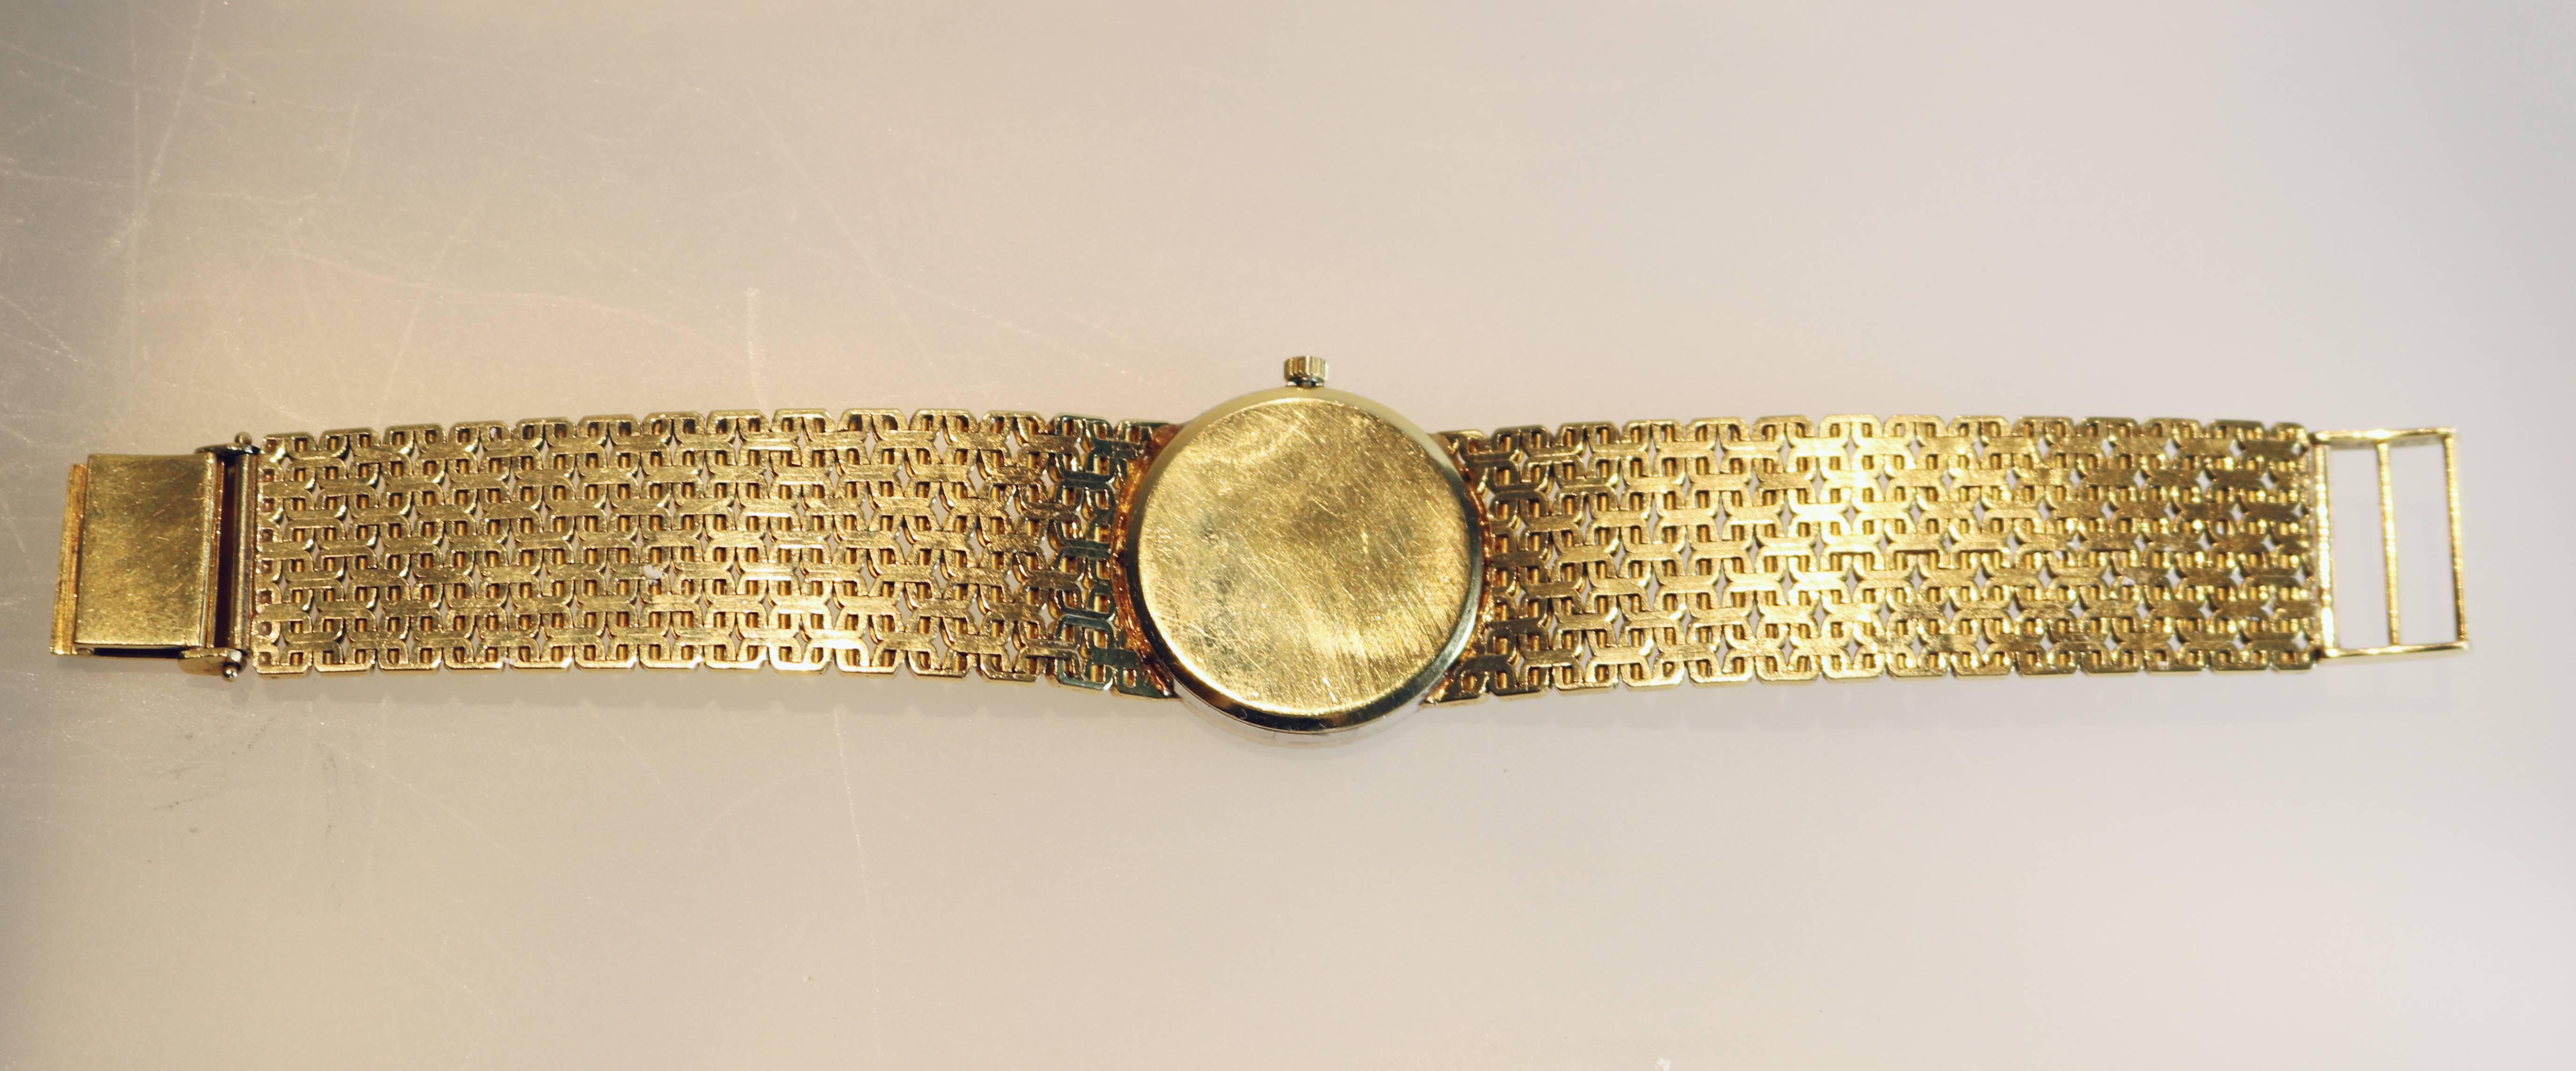 Ladies Ebel watch in 18K gold with a diamond bezel set with single cut diamonds. Italian gold Corletto bracelet measuring 5 3/4" in length.  The face of the watch is  25mm in diameter.  The dial has several very small hairline fractures. 